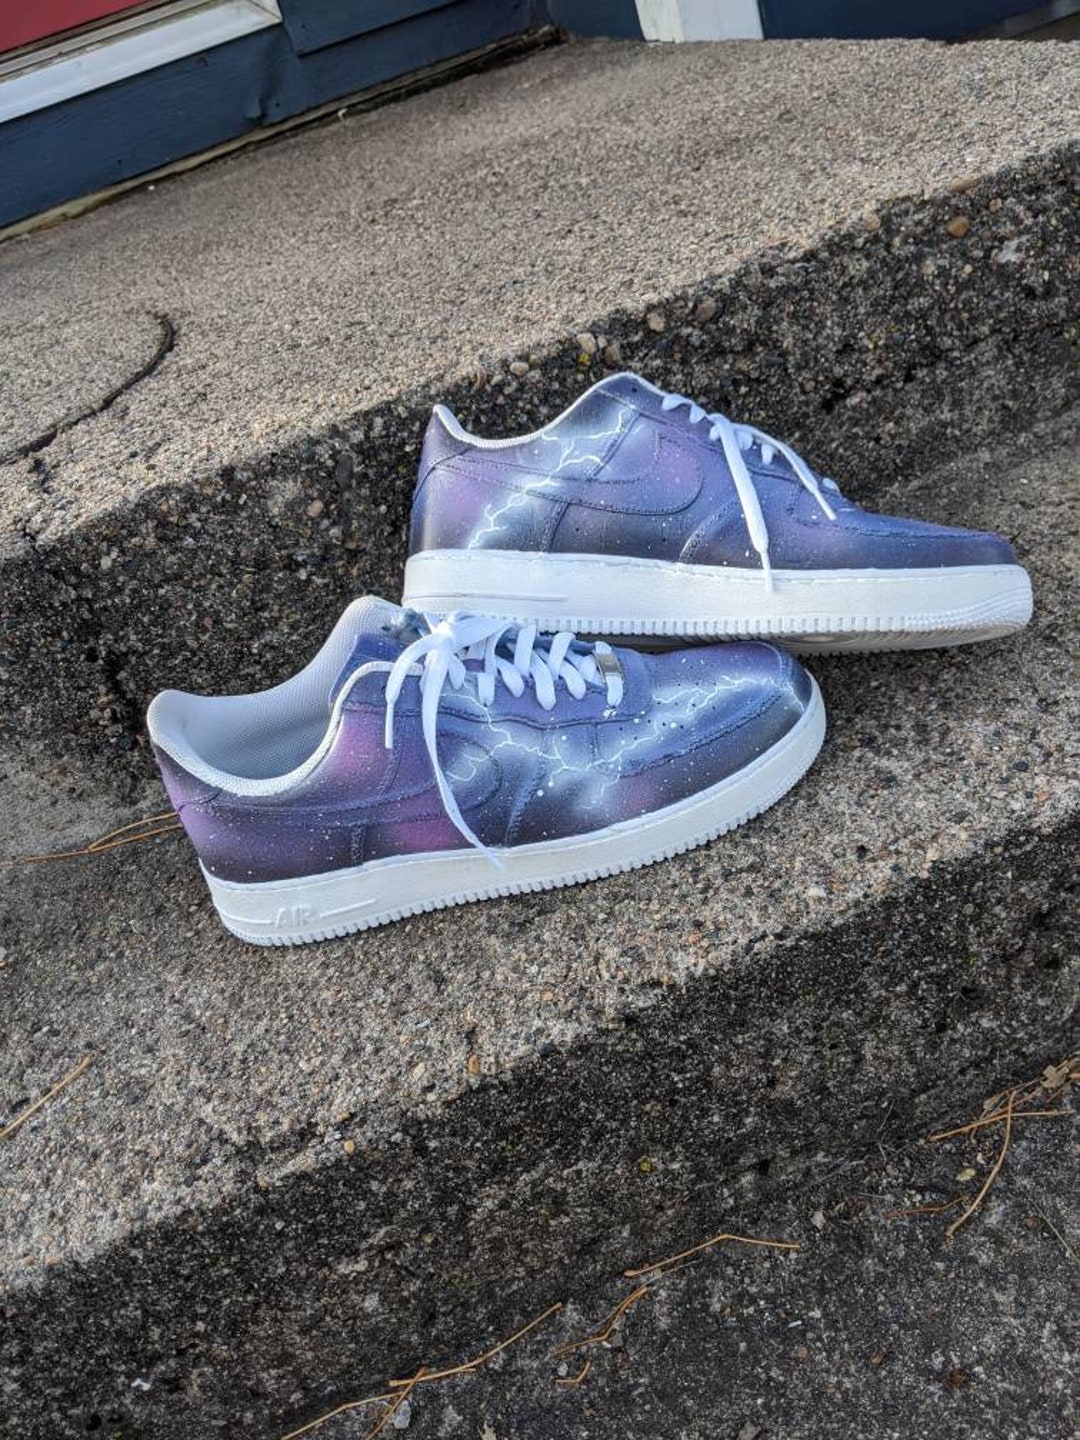 Custom Galaxy Air Force 1 Painted Air Force 1 Space Themed - Etsy